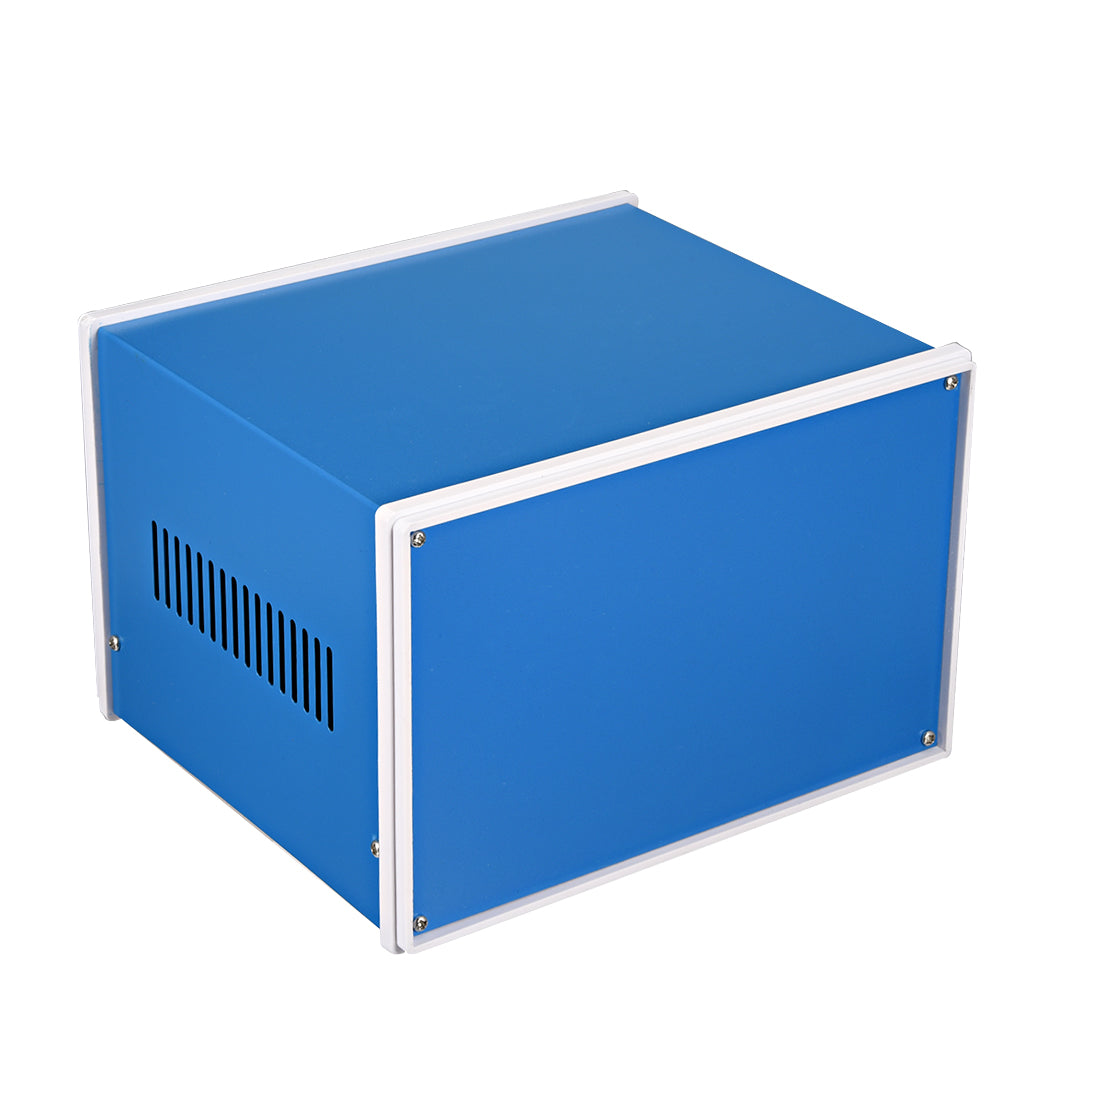 uxcell Uxcell Metal Blue Project Junction Box Enclosure Case 210 x 180 x 140mm/8.27 x 7.09 x 5.51inch